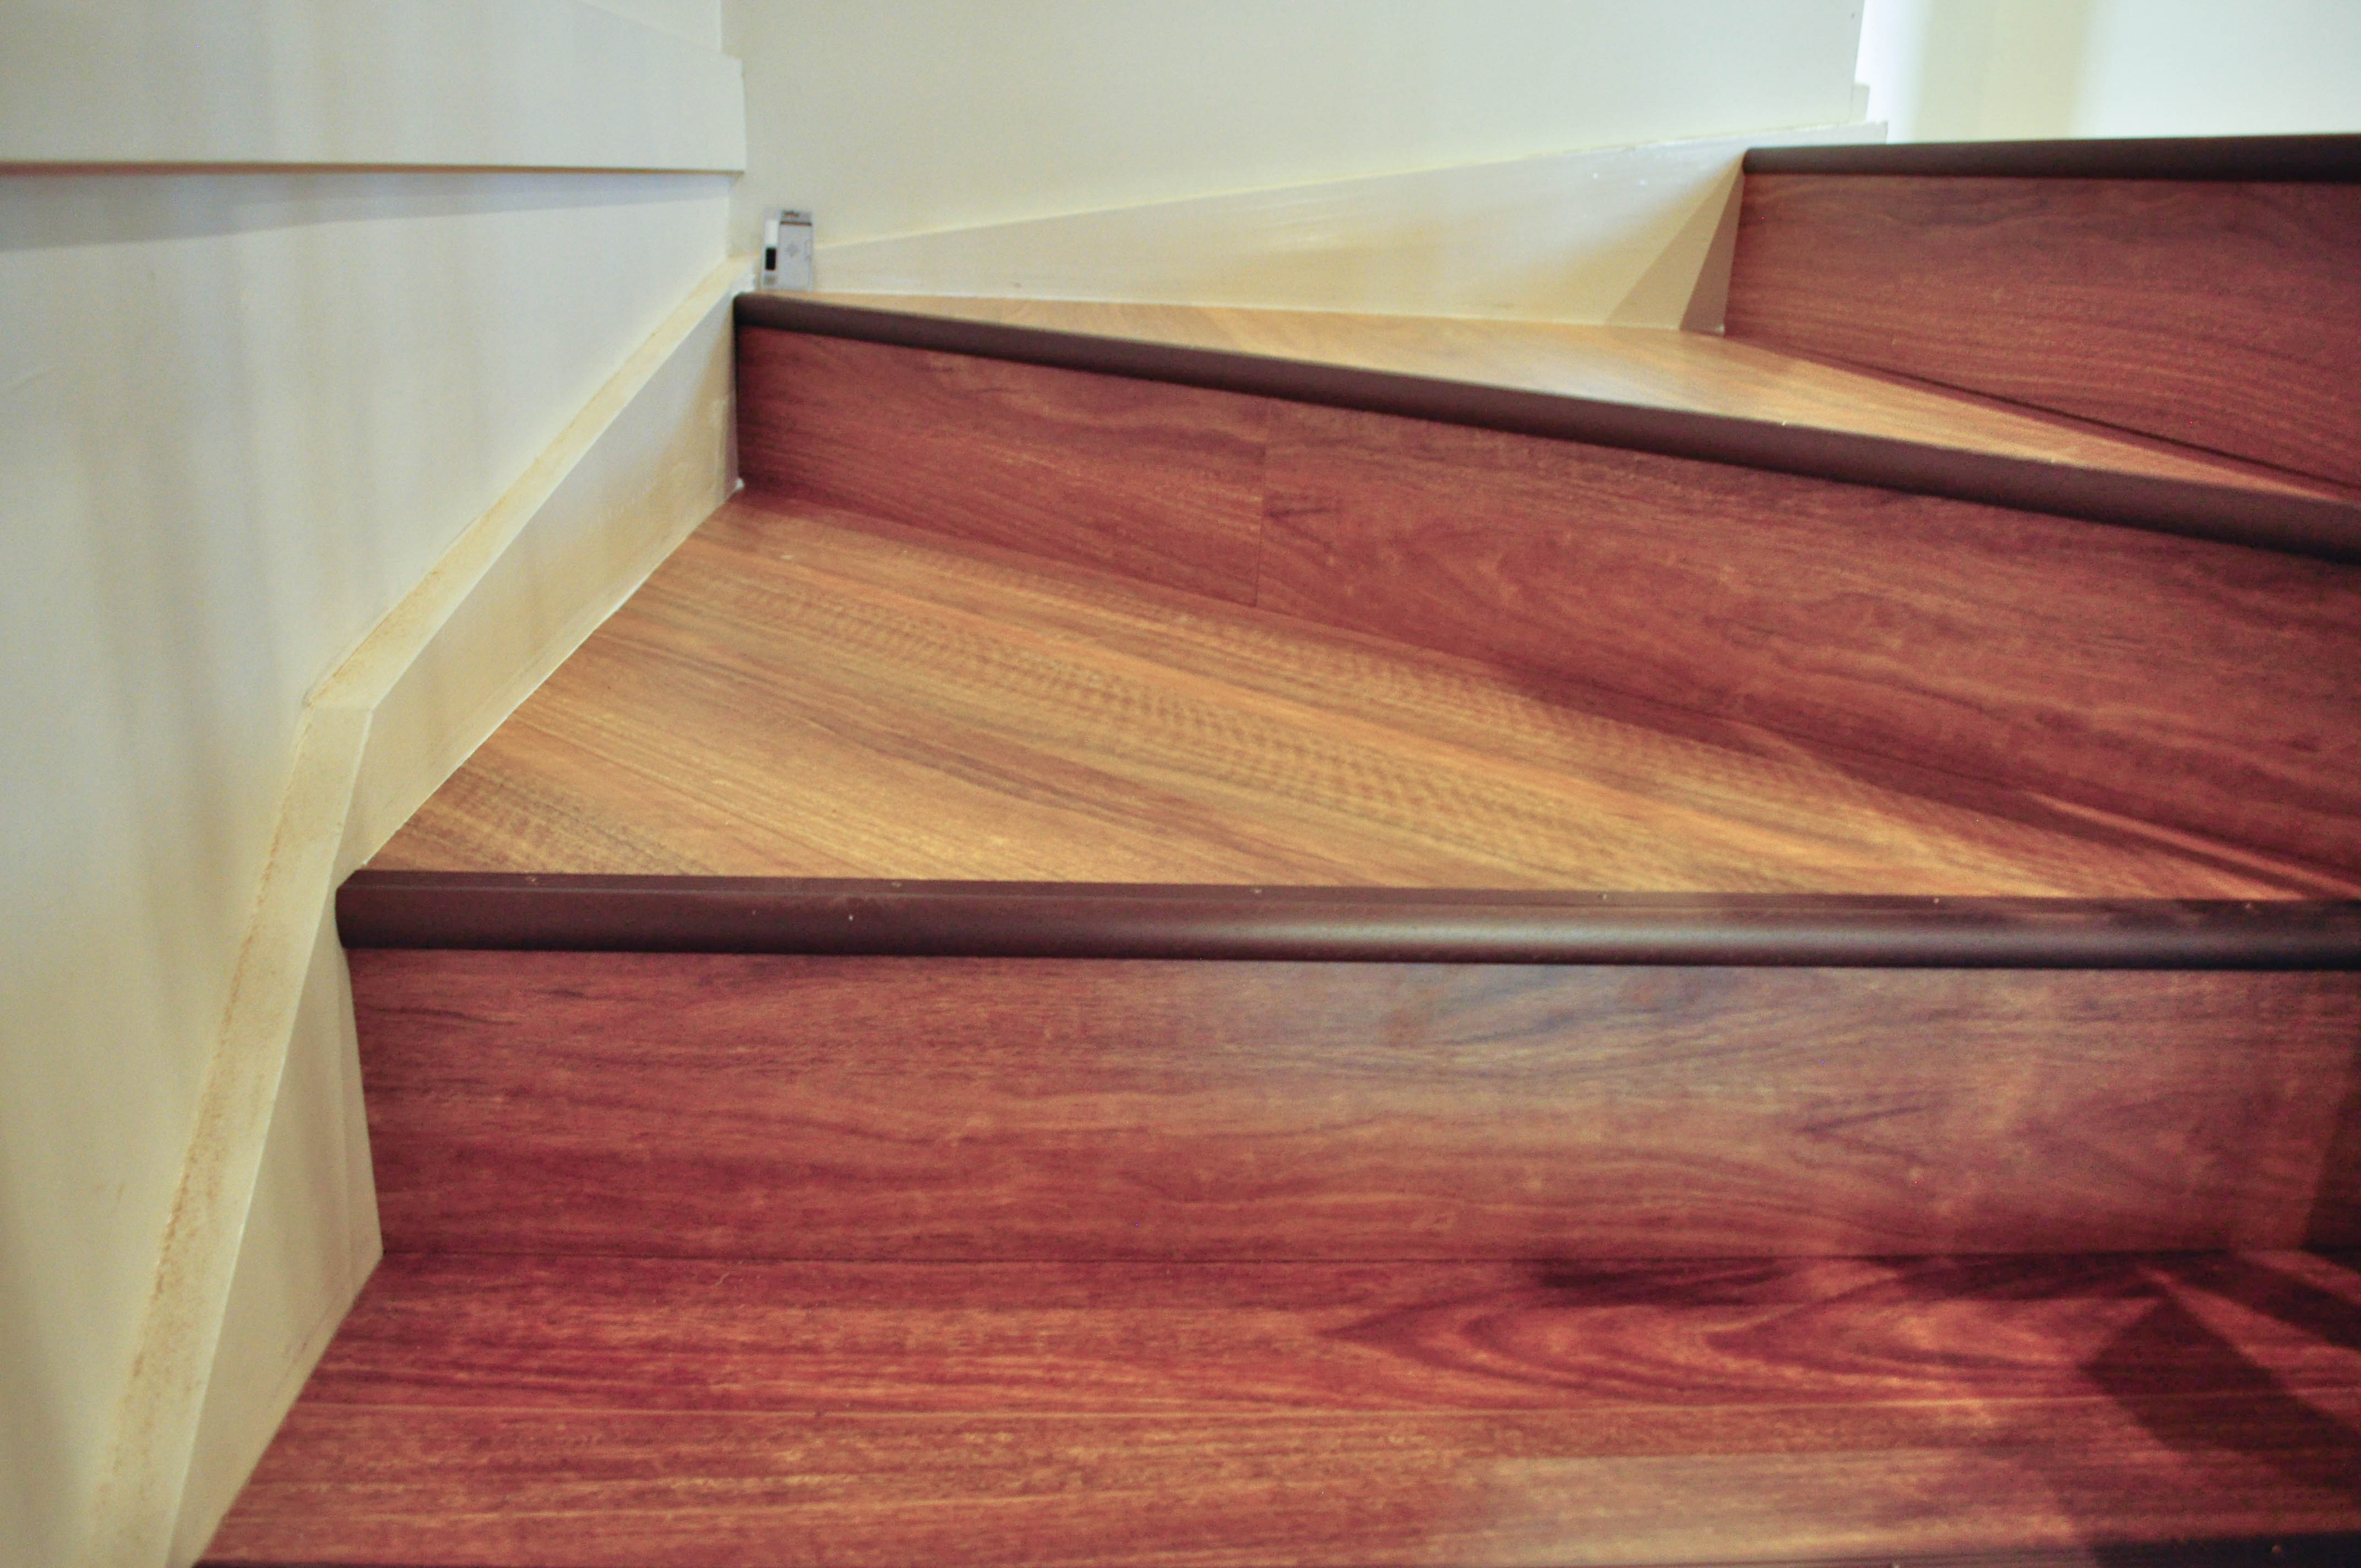 The laminate installation on a staircase done by Concord Floors. Showing 4 triangular steps of the staircase.